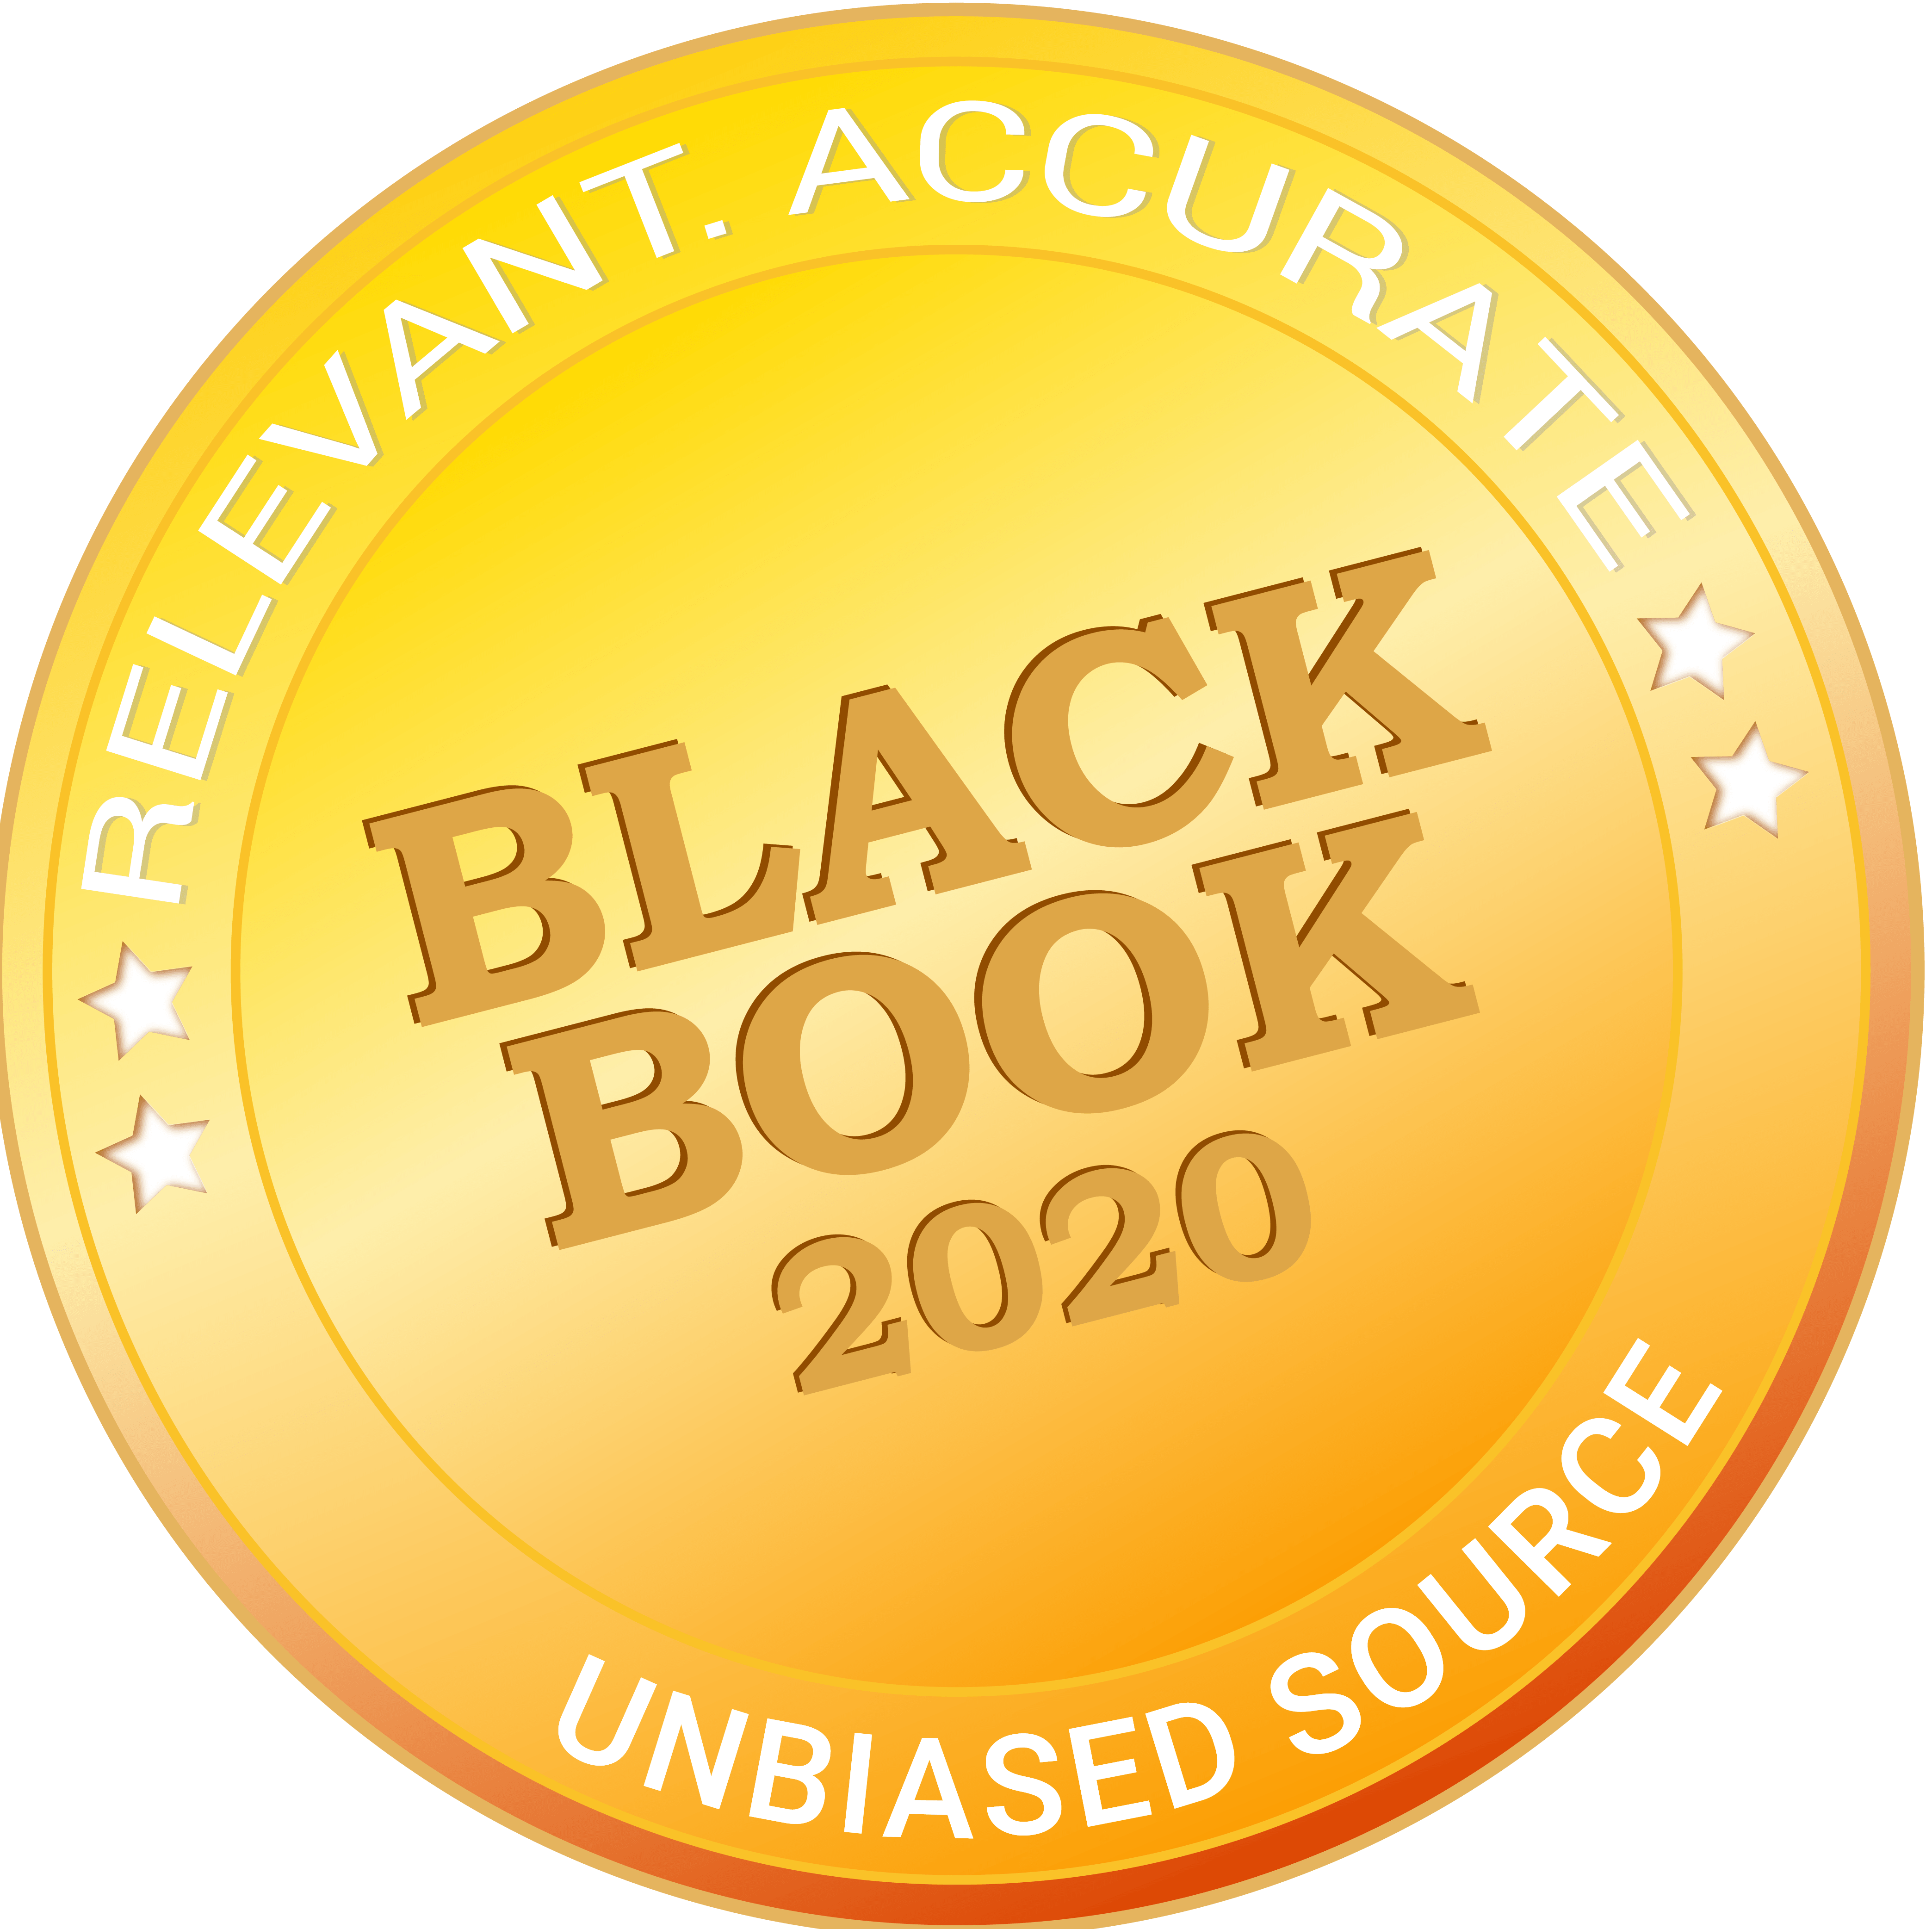 2020 Black Book Cost Accounting & Financial Decision Support Solutions Vendors (F3)